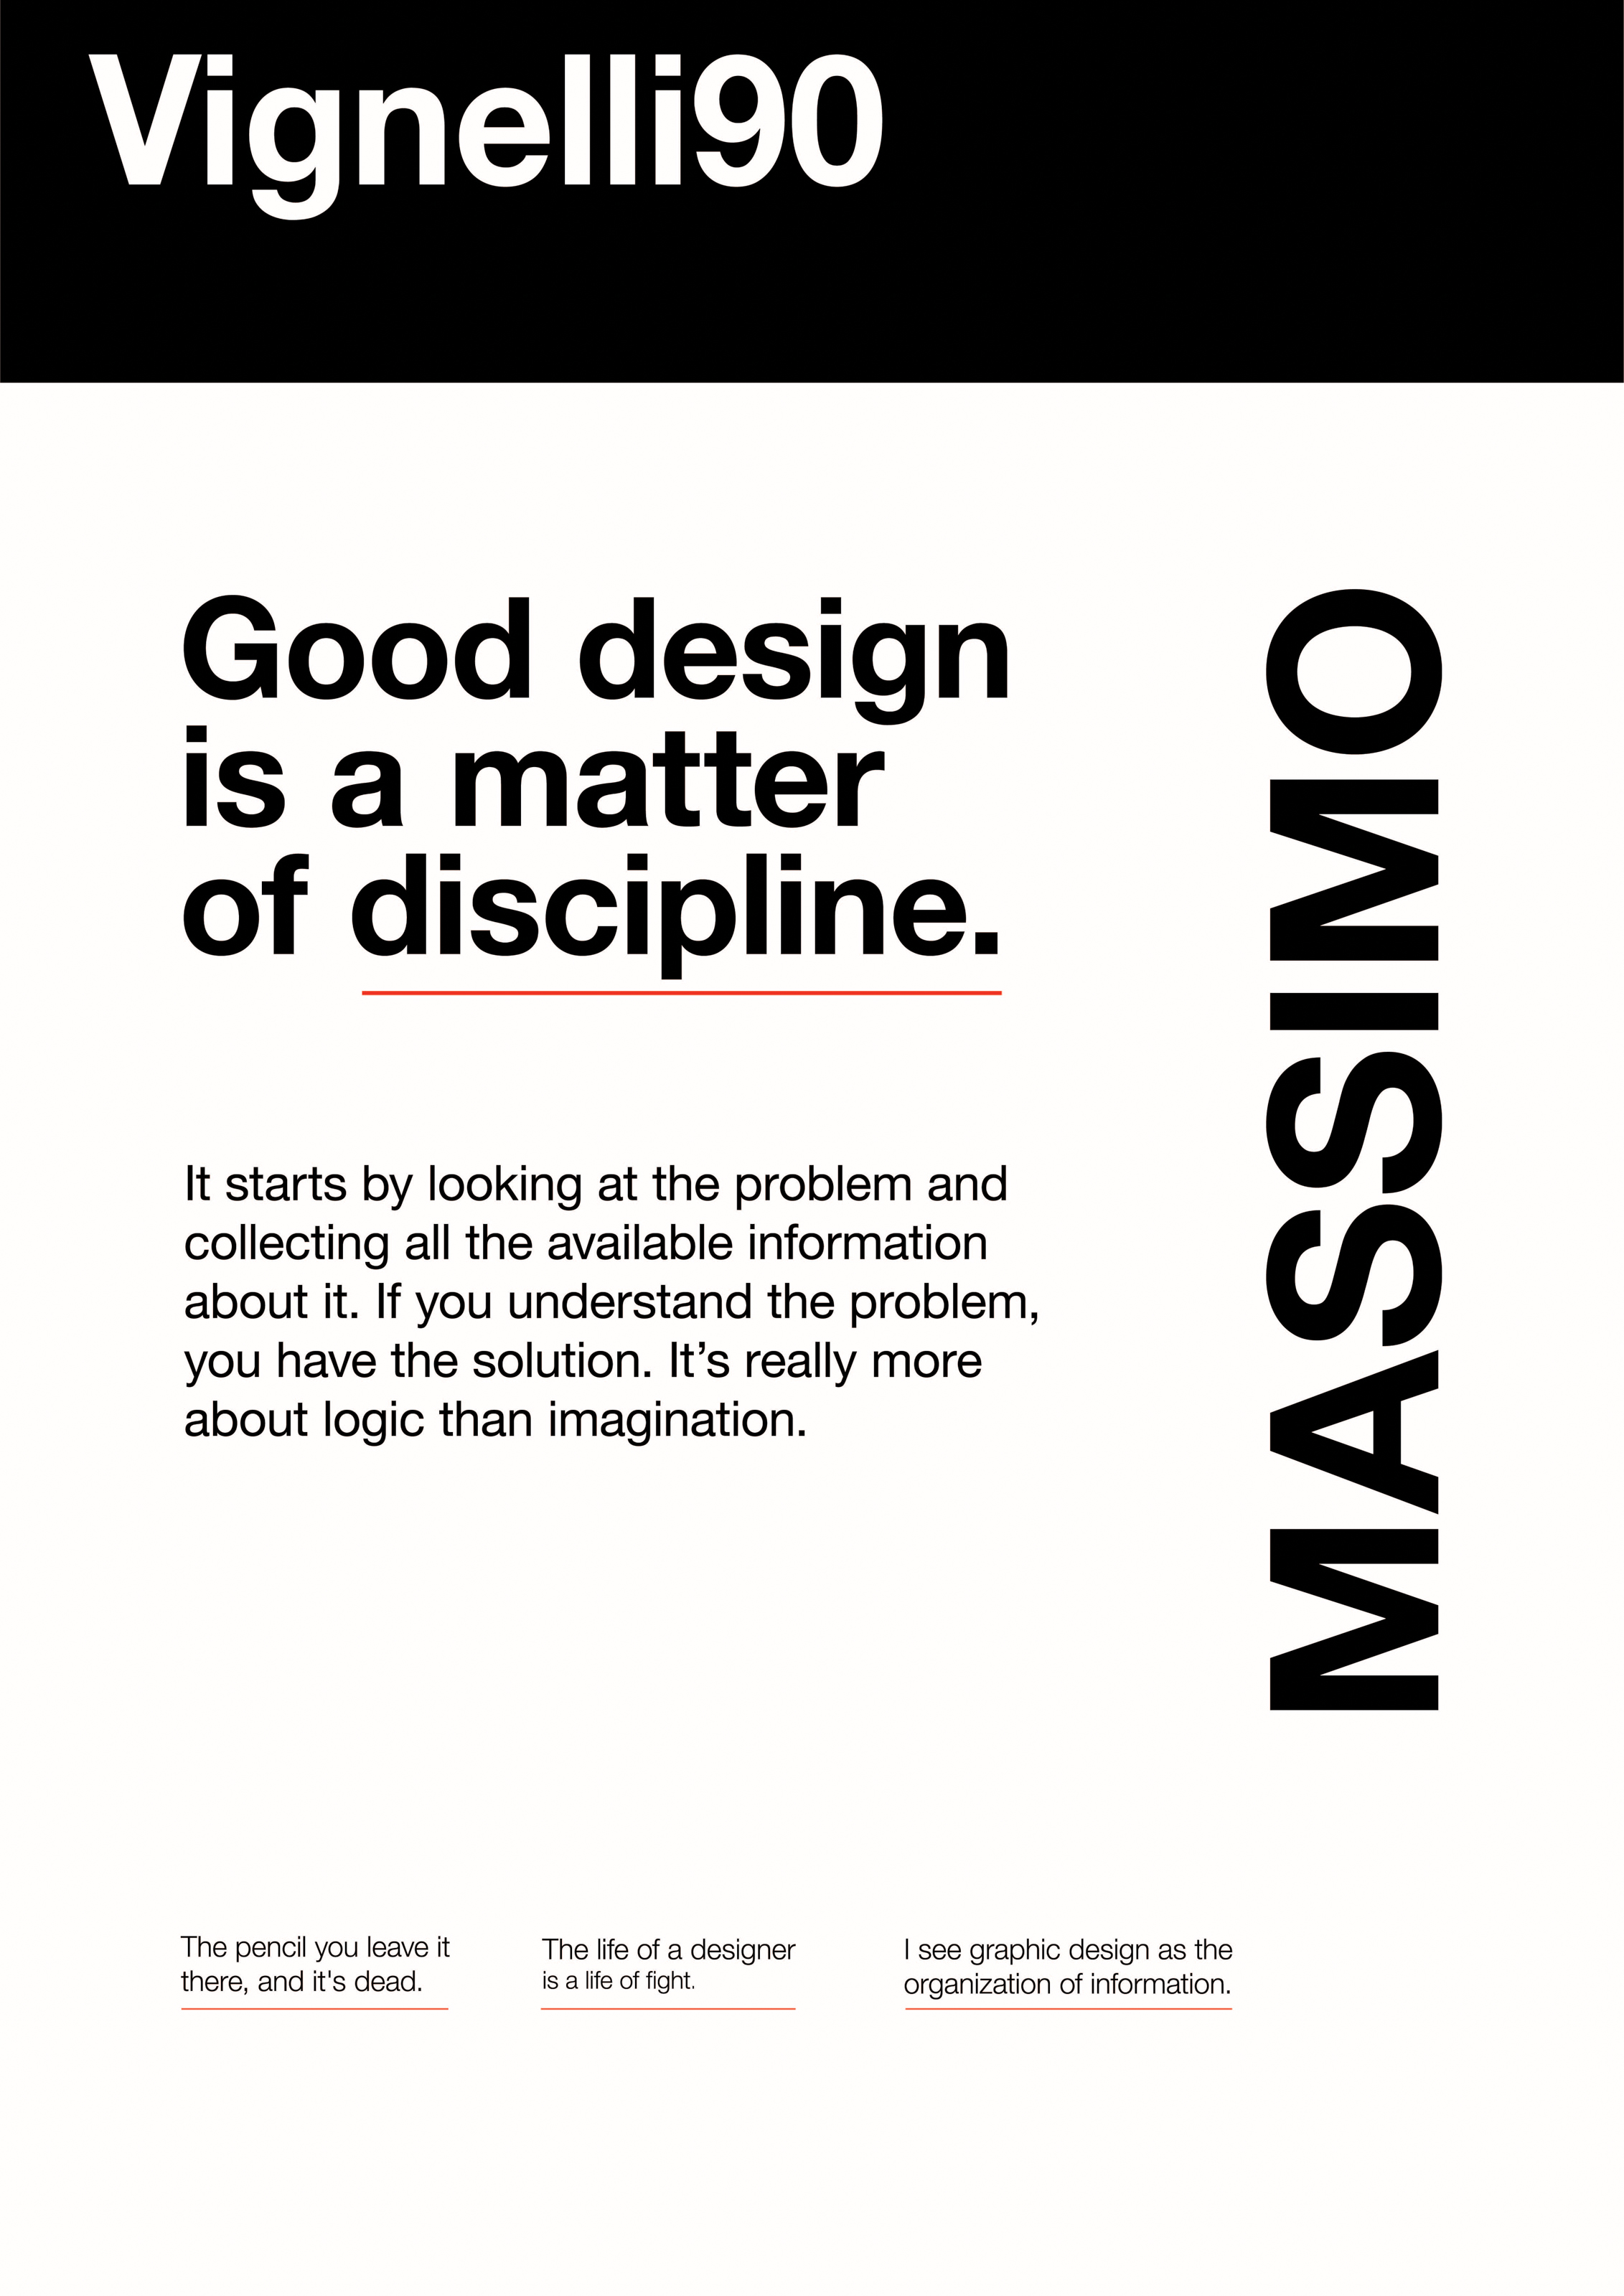 Poster designed by Jameson Officer-Thurston, in the style of Massimo Vignelli's Unigrid design system.